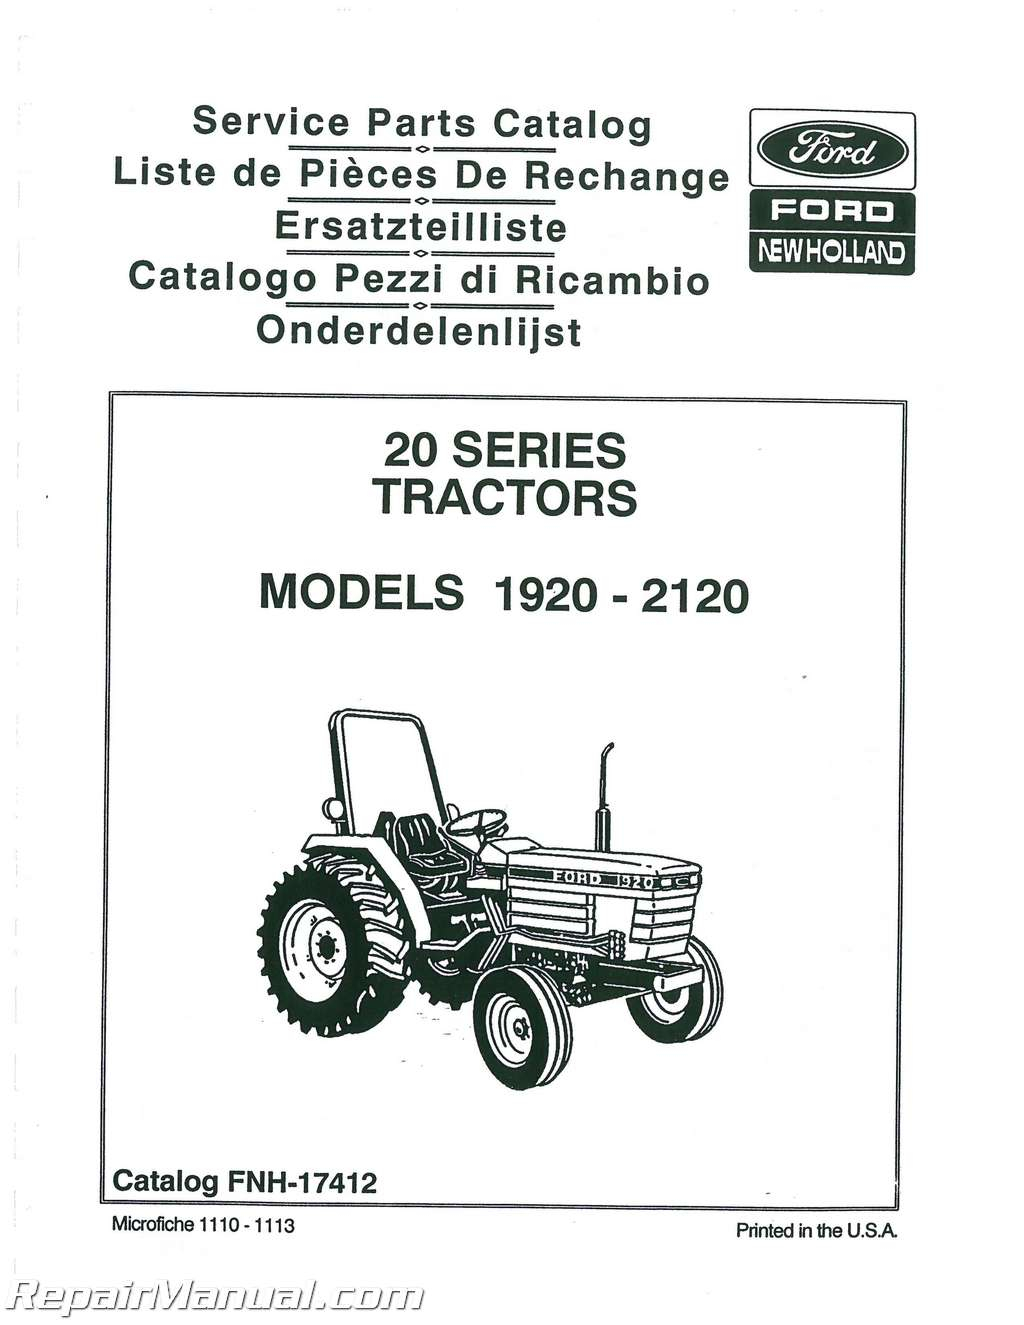 New Holland Skid Steer Parts Diagram Ford 1920 2120 Tractor Parts Manual